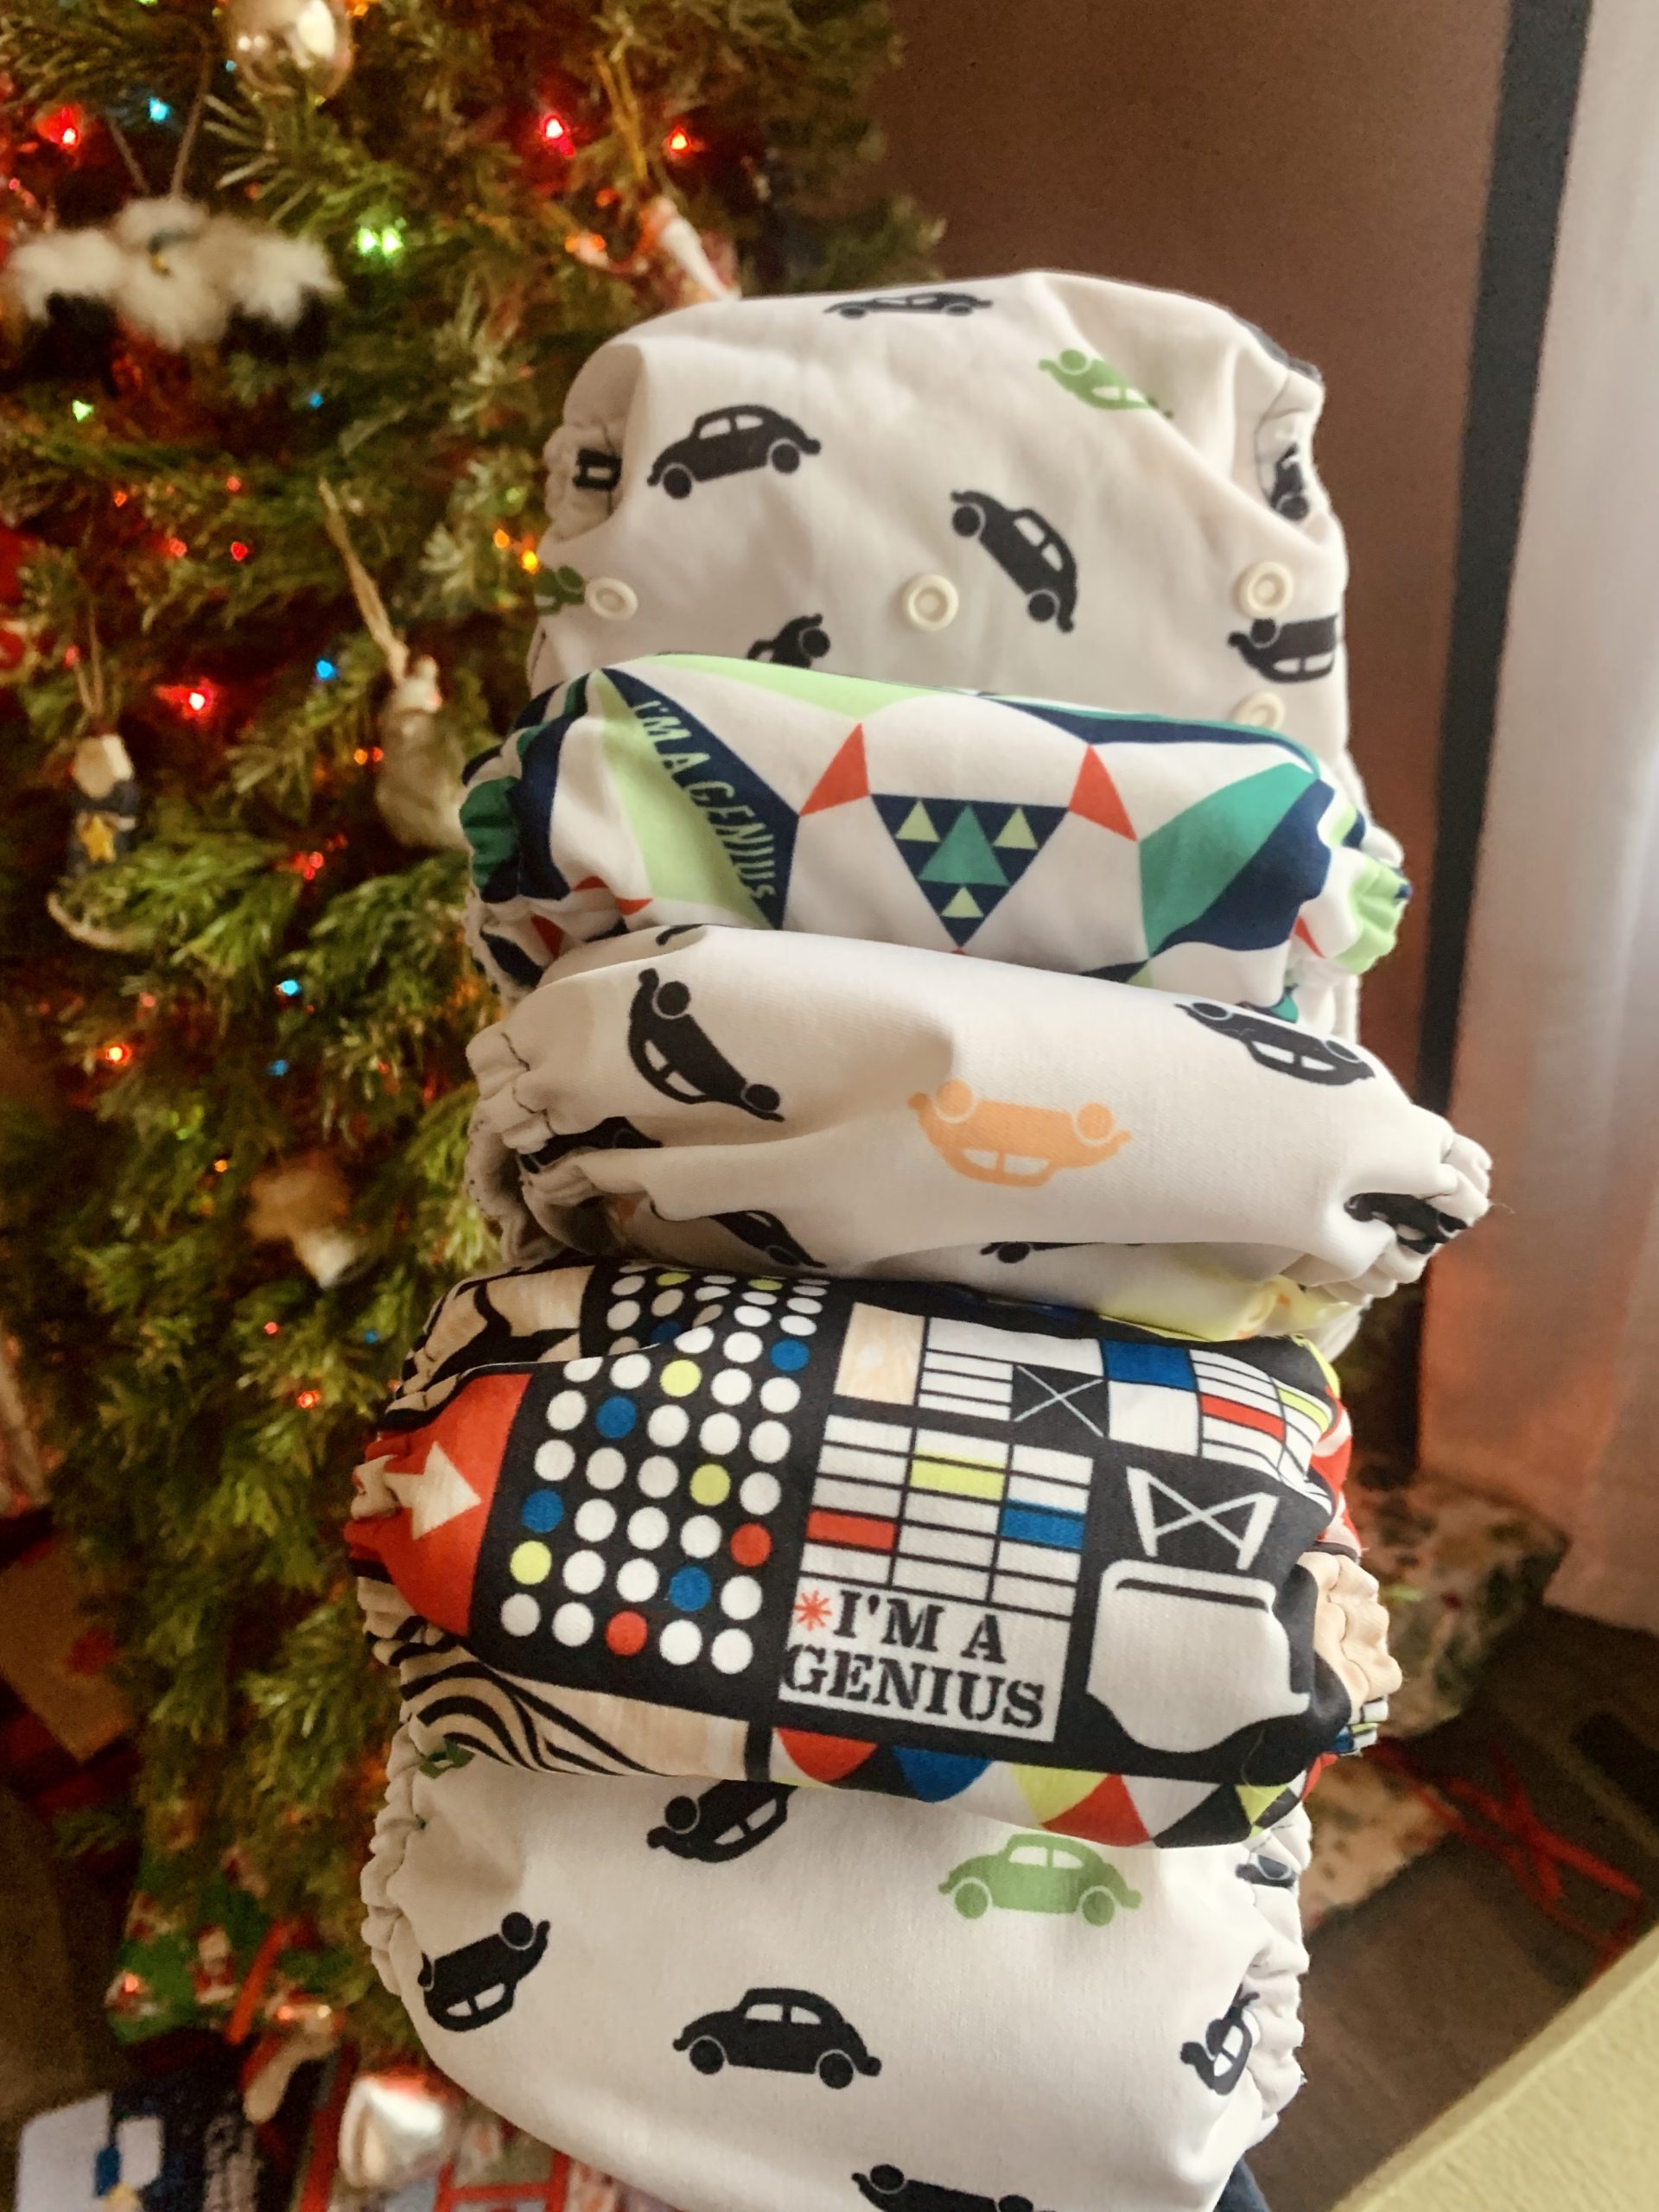 The secondhand score of the year- buying used cloth diapers